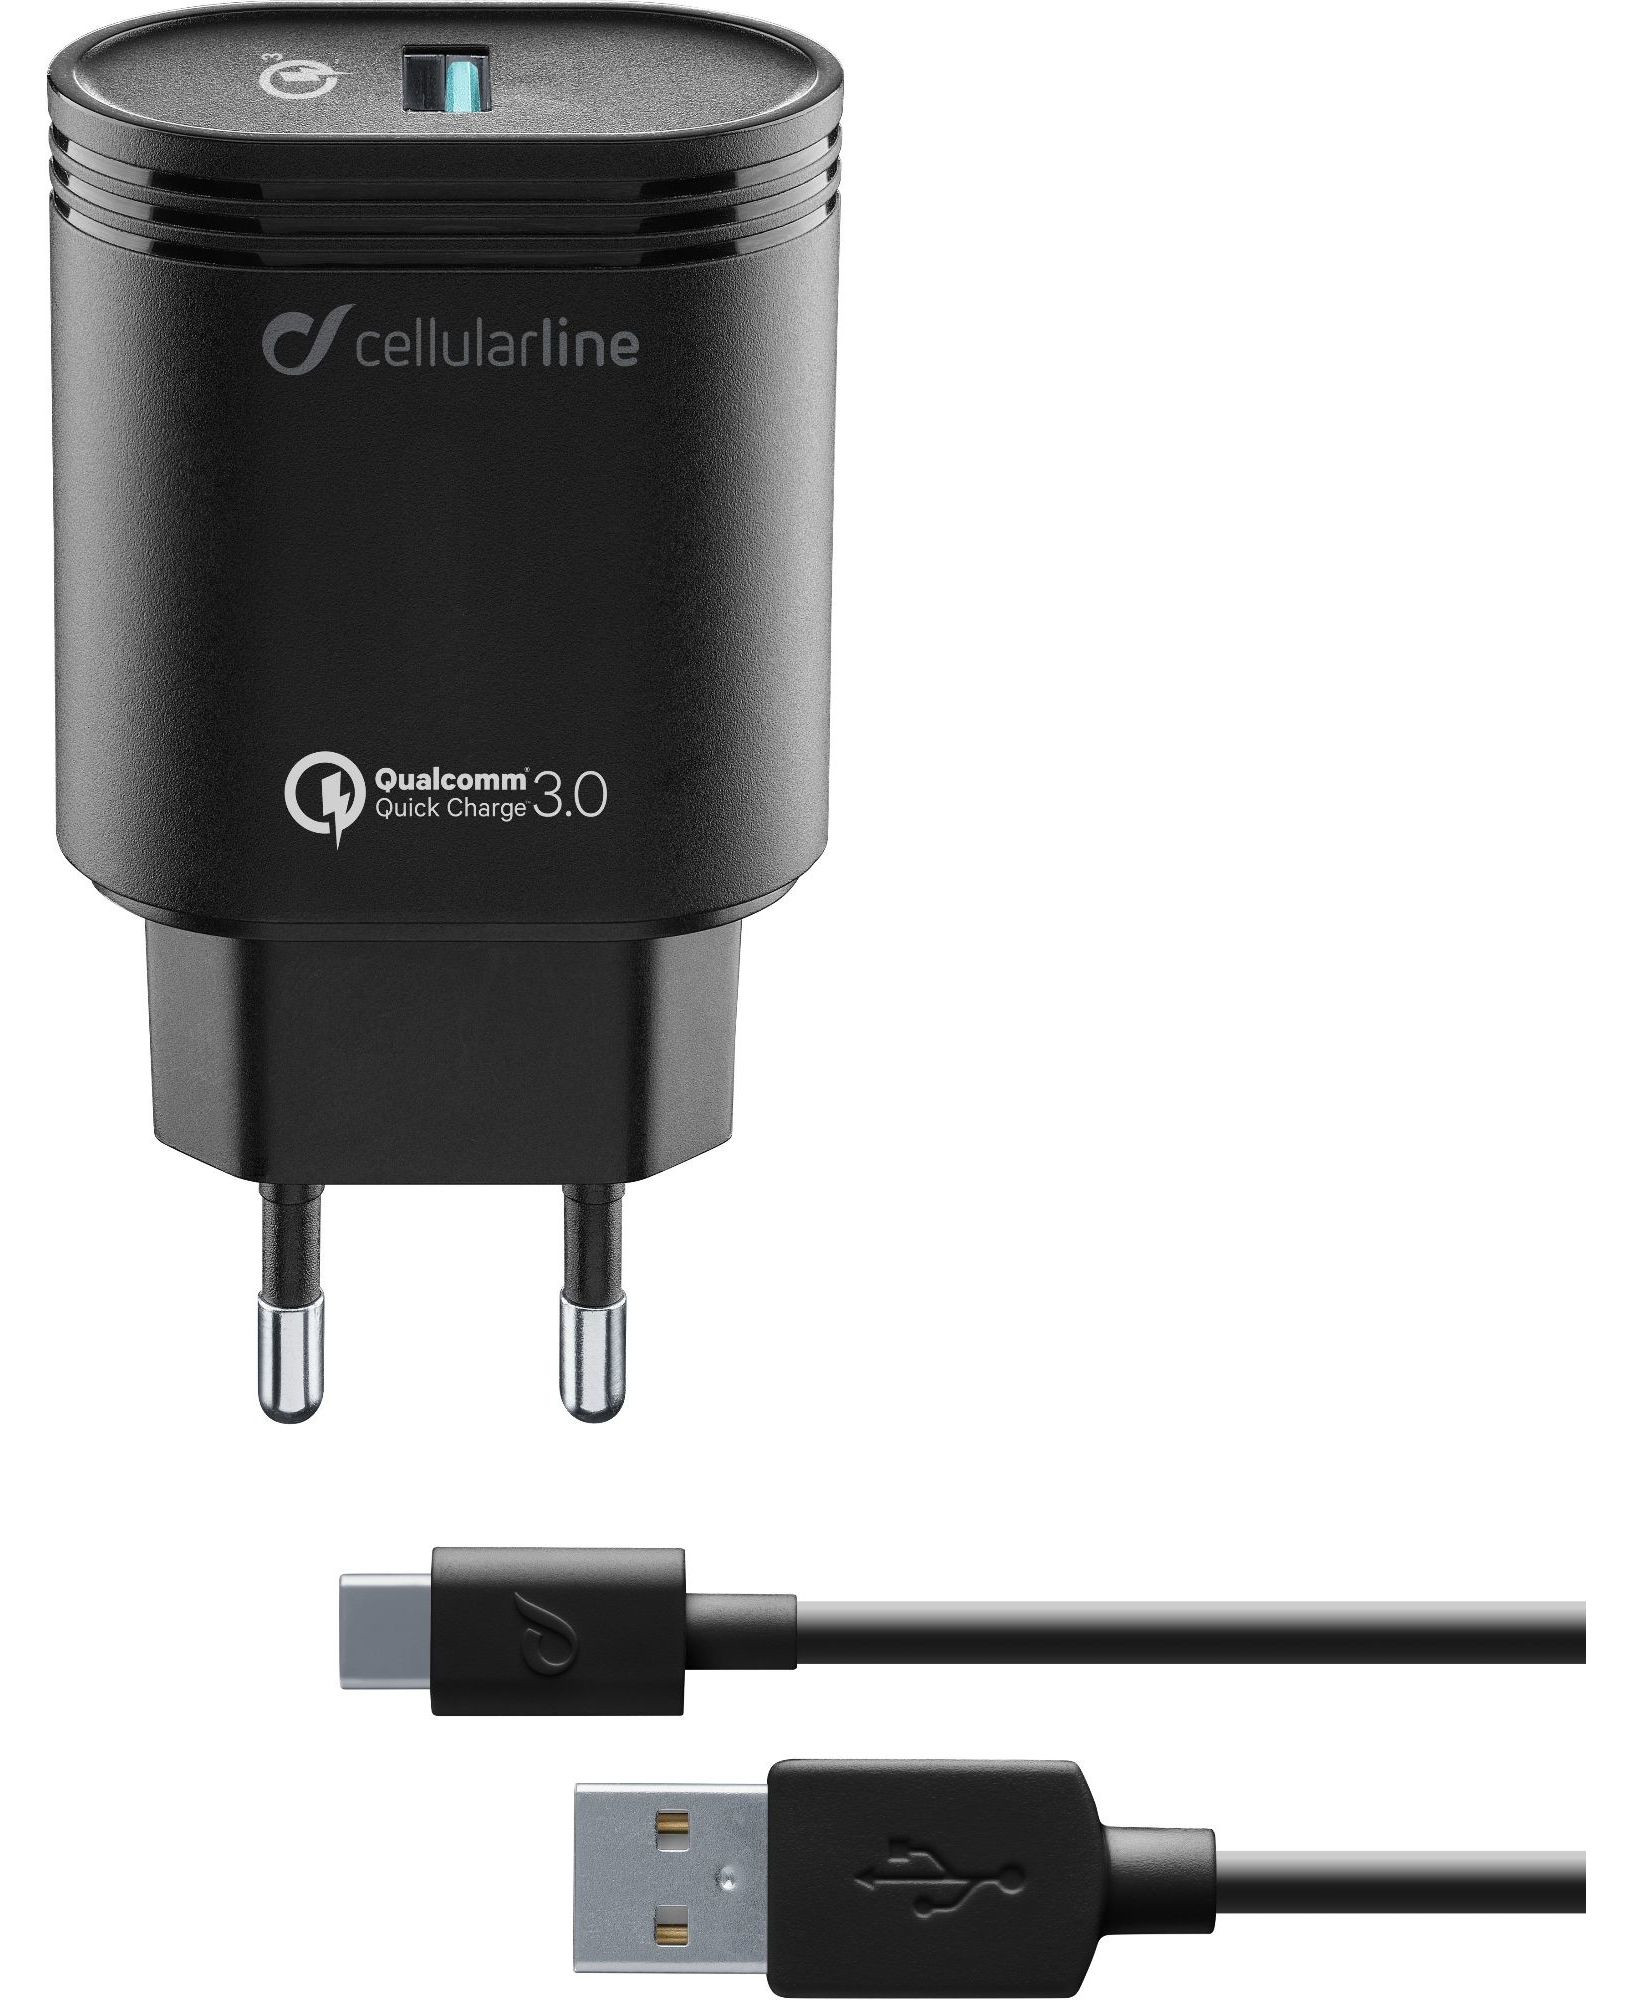 Cellularline USB Charger Kit 18W - USB-C - Huawei, Xiaomi, Wiko, Asus and other smartphone